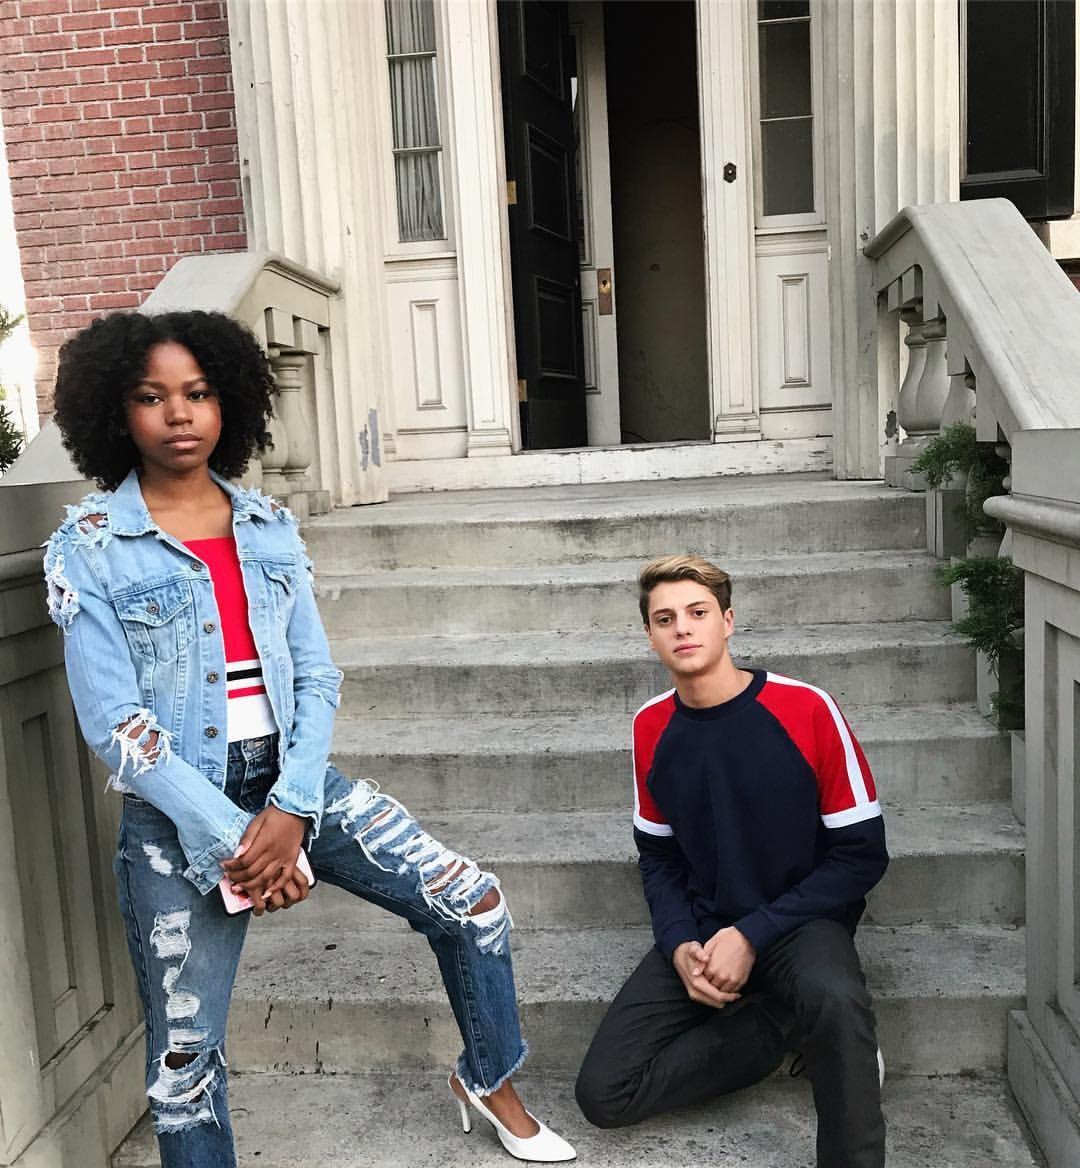 Riele Downs and Jace Norman. Jace Norman. Norman